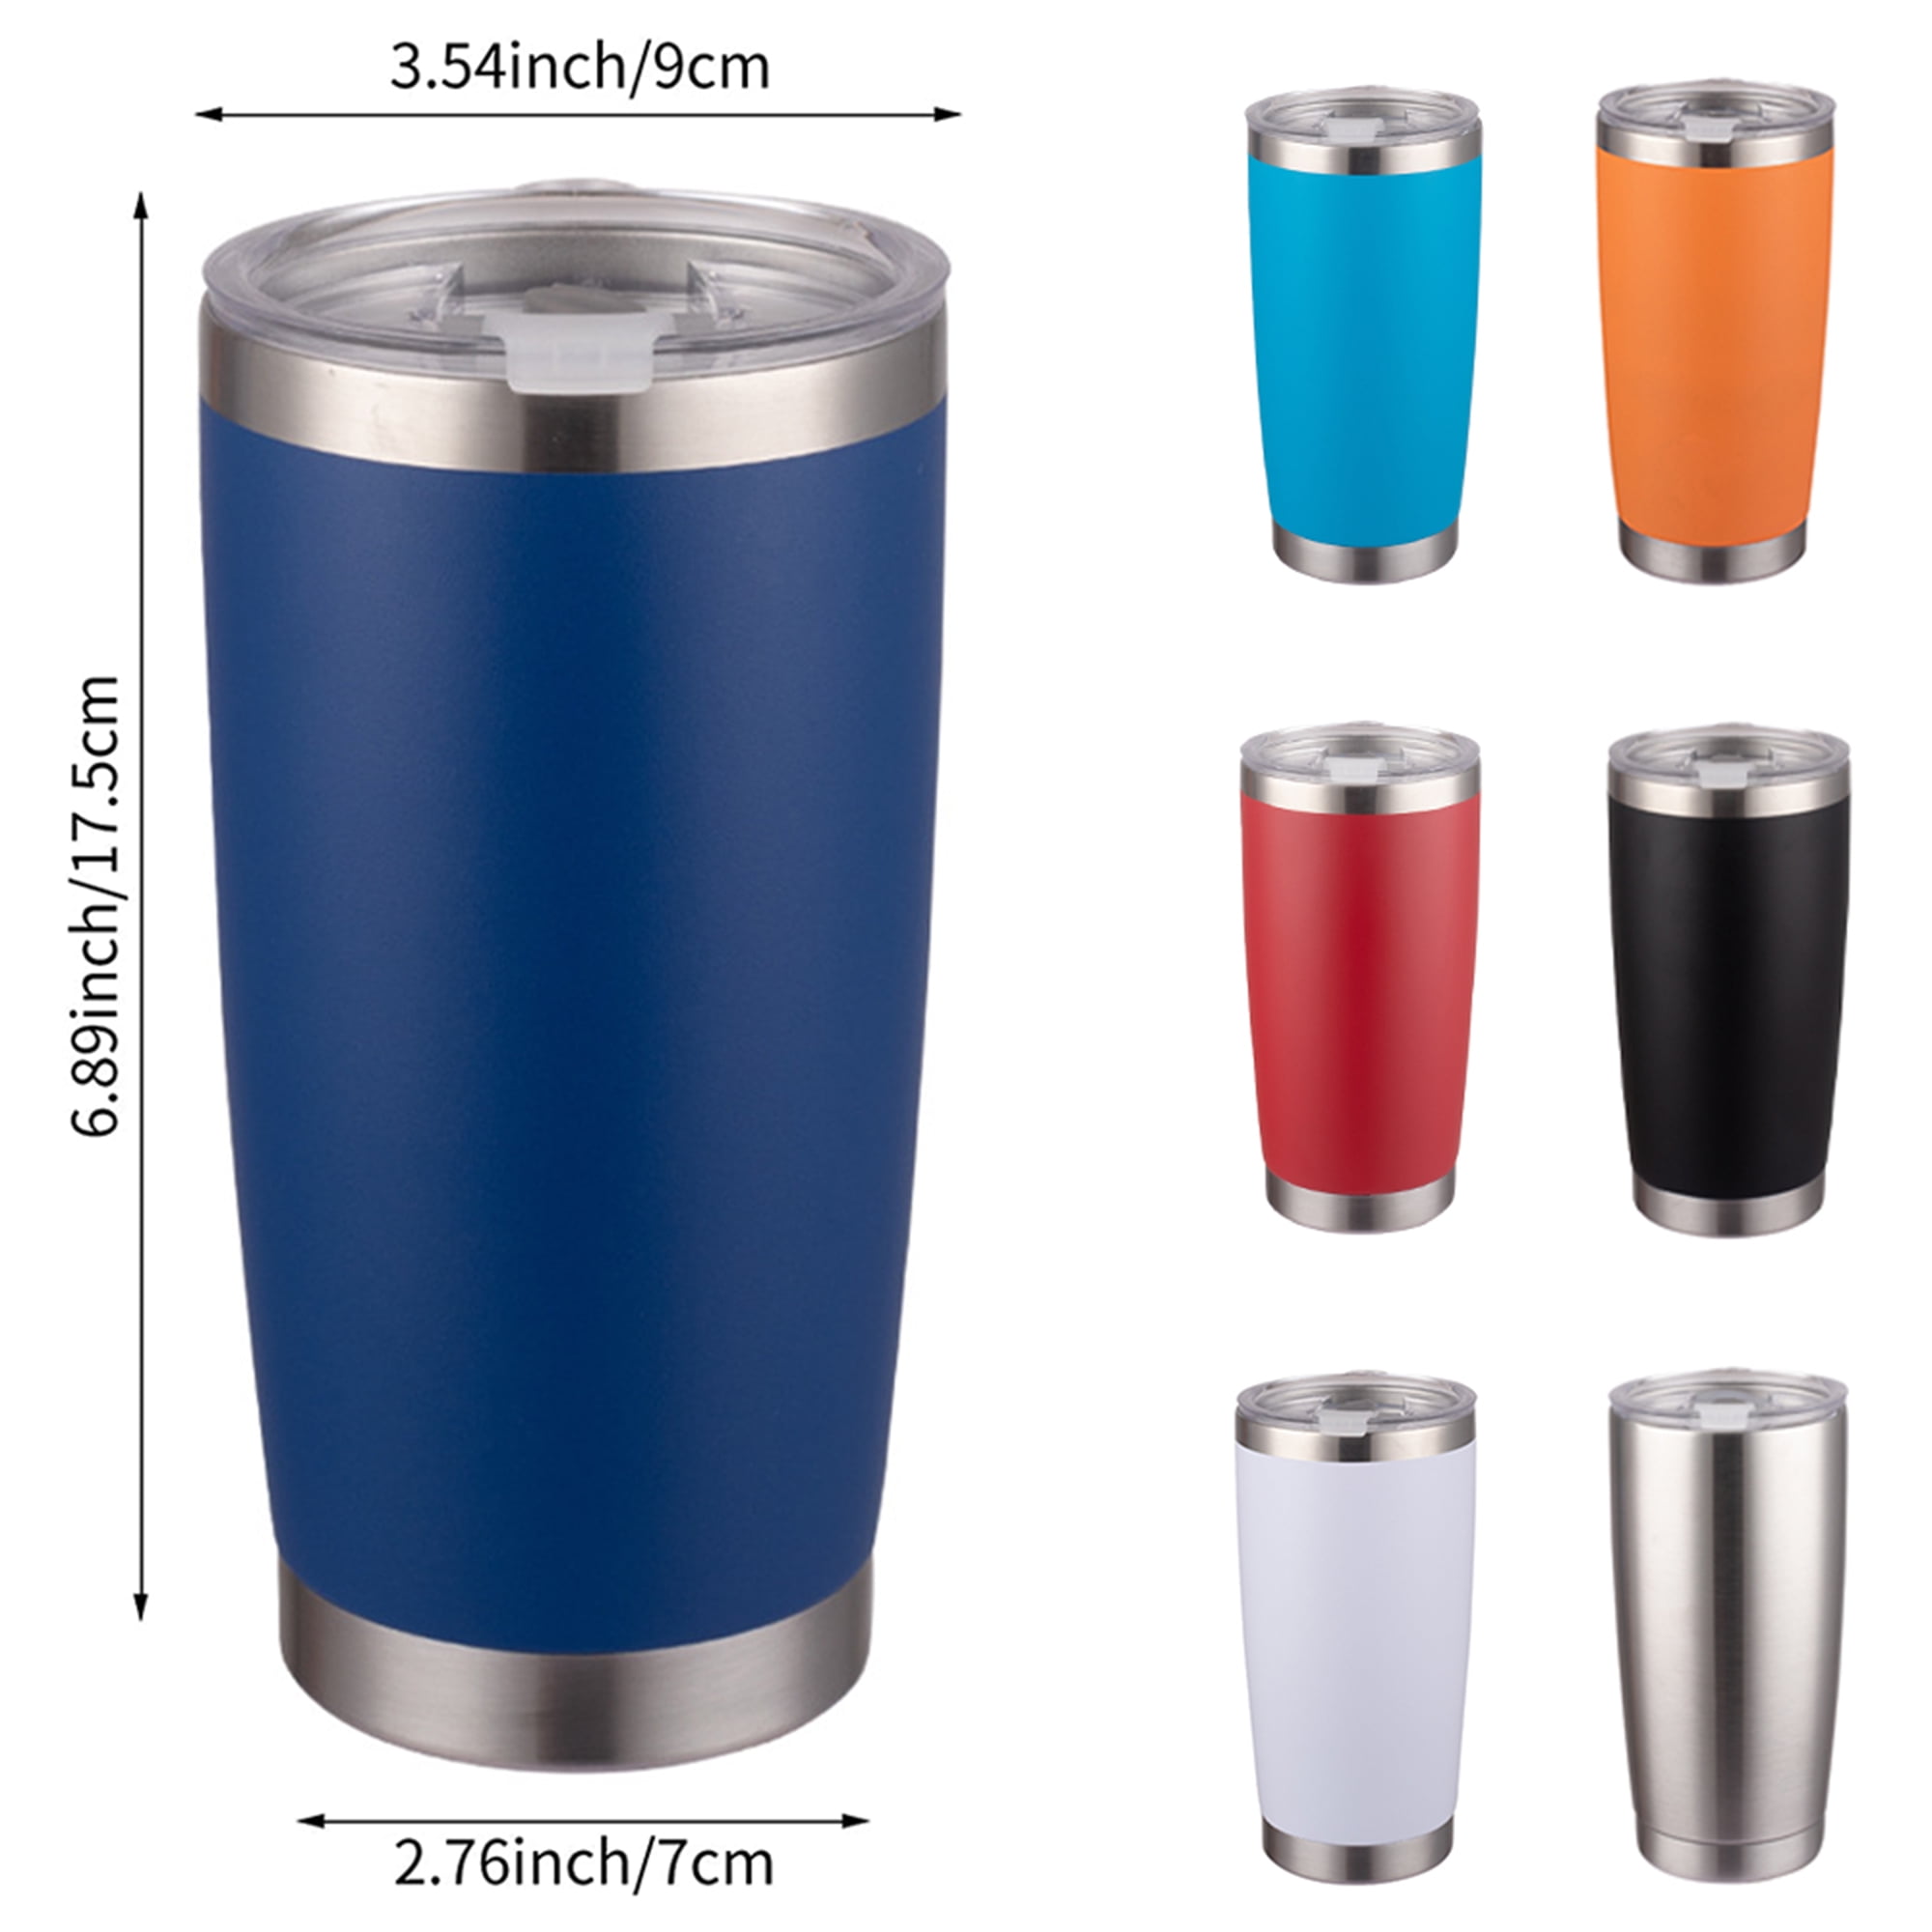 Zero Degree Stainless Steel Small Tumbler with Lid, Double Wall Vacuum  Insulated Mug for Hot and Col…See more Zero Degree Stainless Steel Small